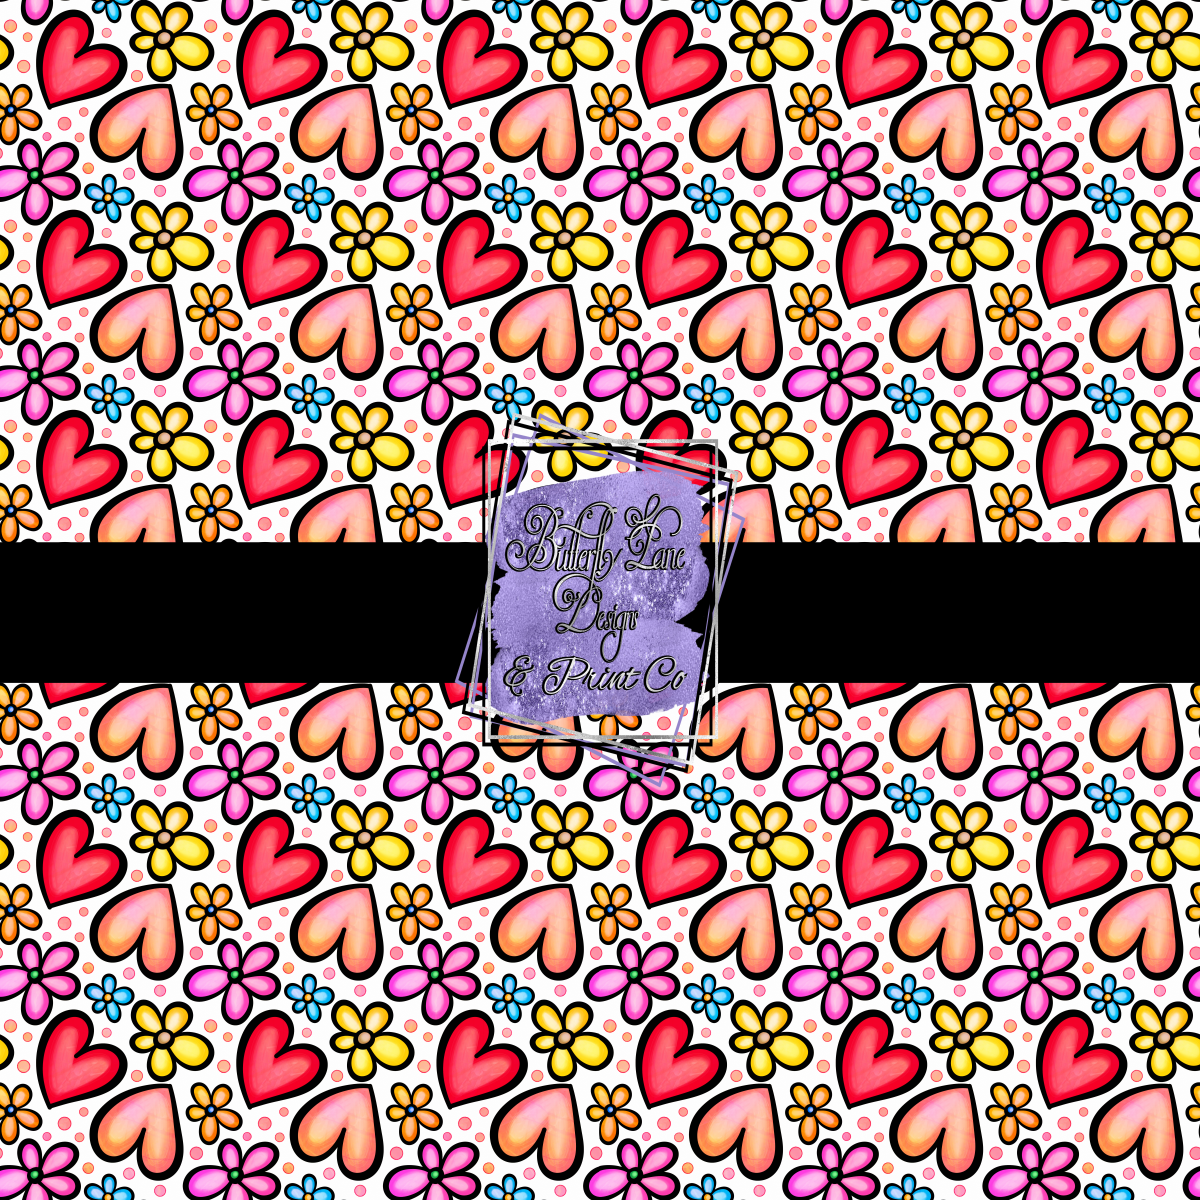 Hearts & Flowers retro style PV 383- Patterned Vinyl